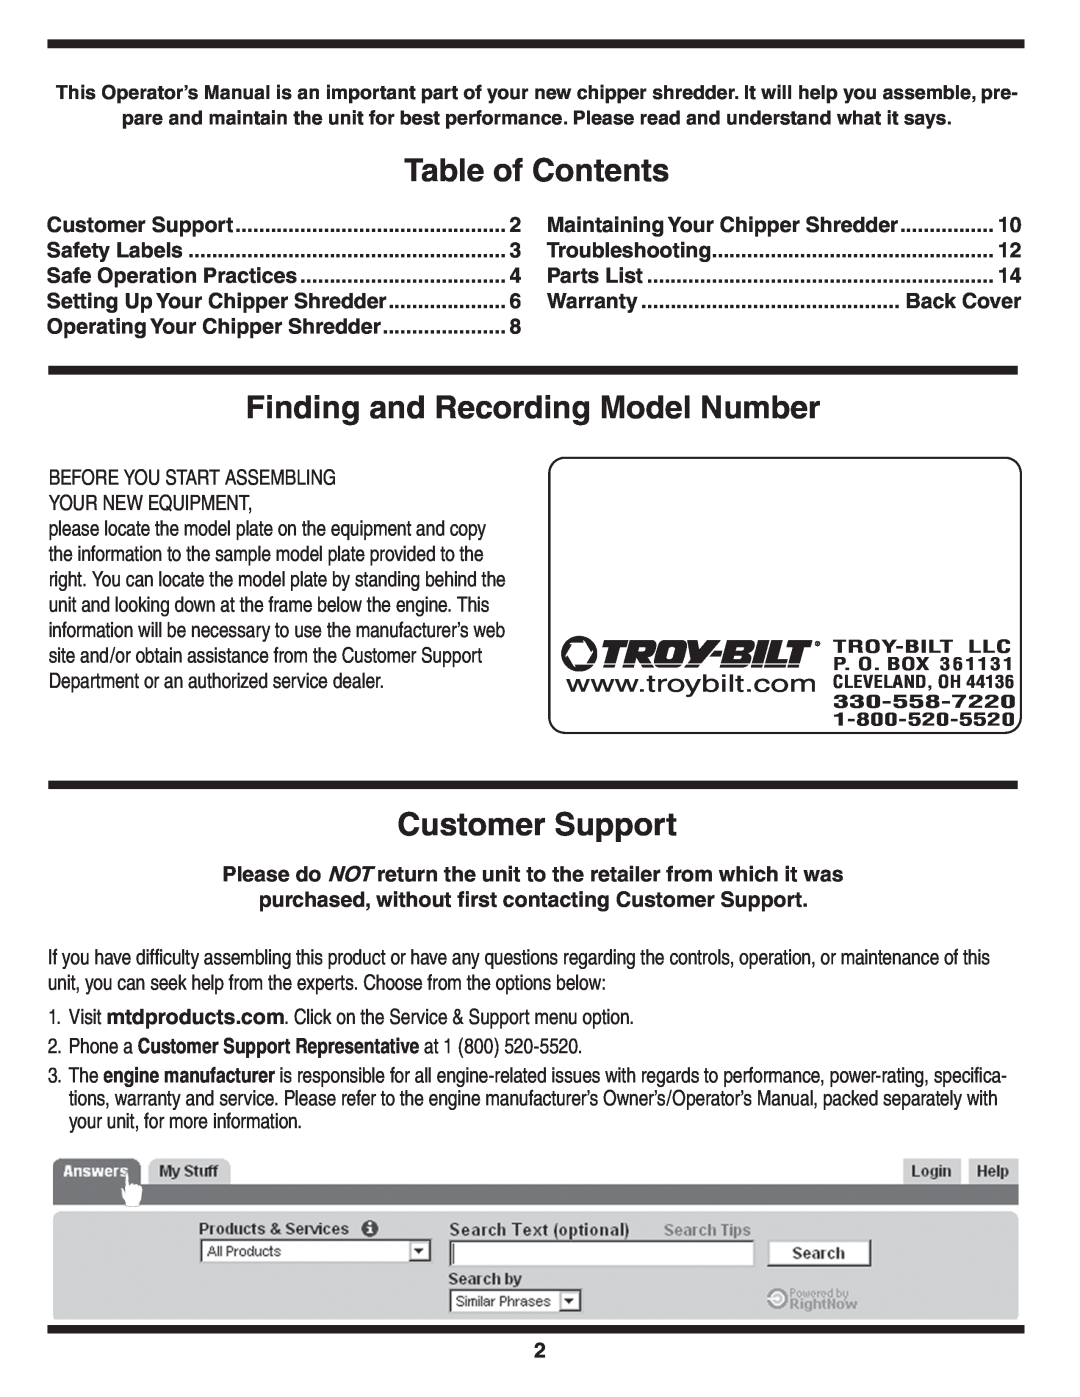 Troy-Bilt 414 Table of Contents, Finding and Recording Model Number, Customer Support, Safety Labels, Warranty, Back Cover 